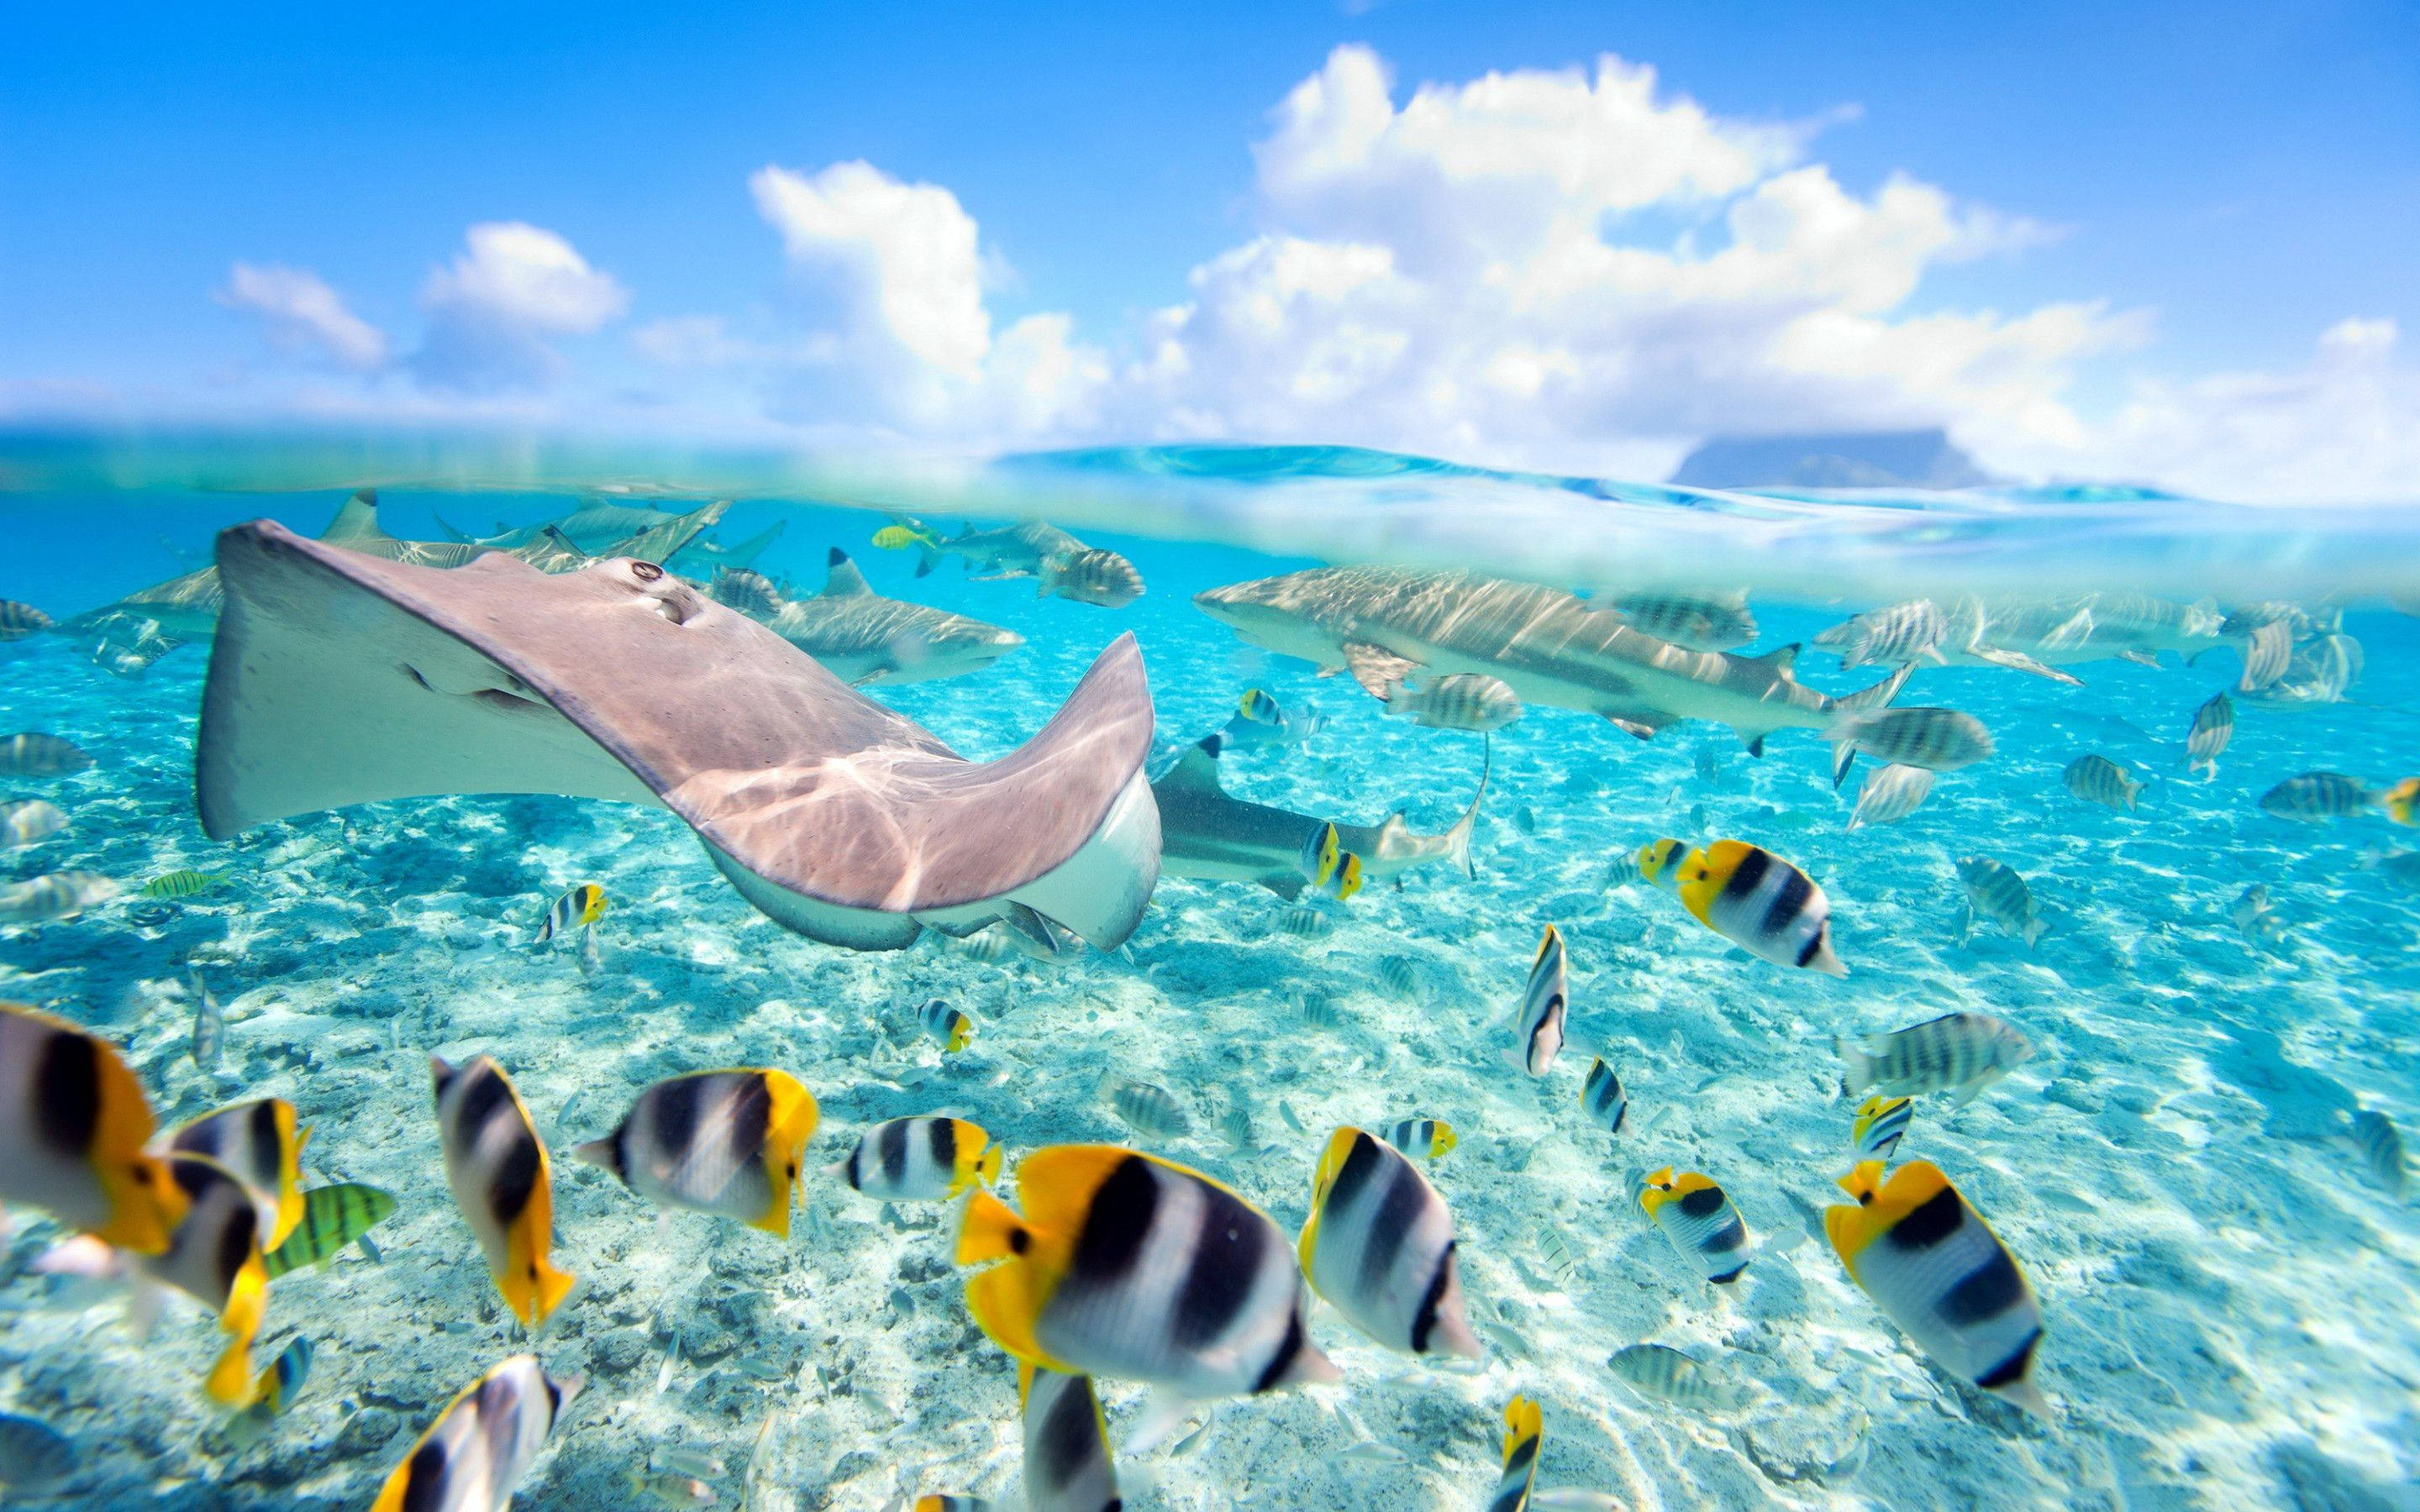 Download 20+ Fish Wallpapers - Most beautiful places in the world |  Download Free Wallpapers